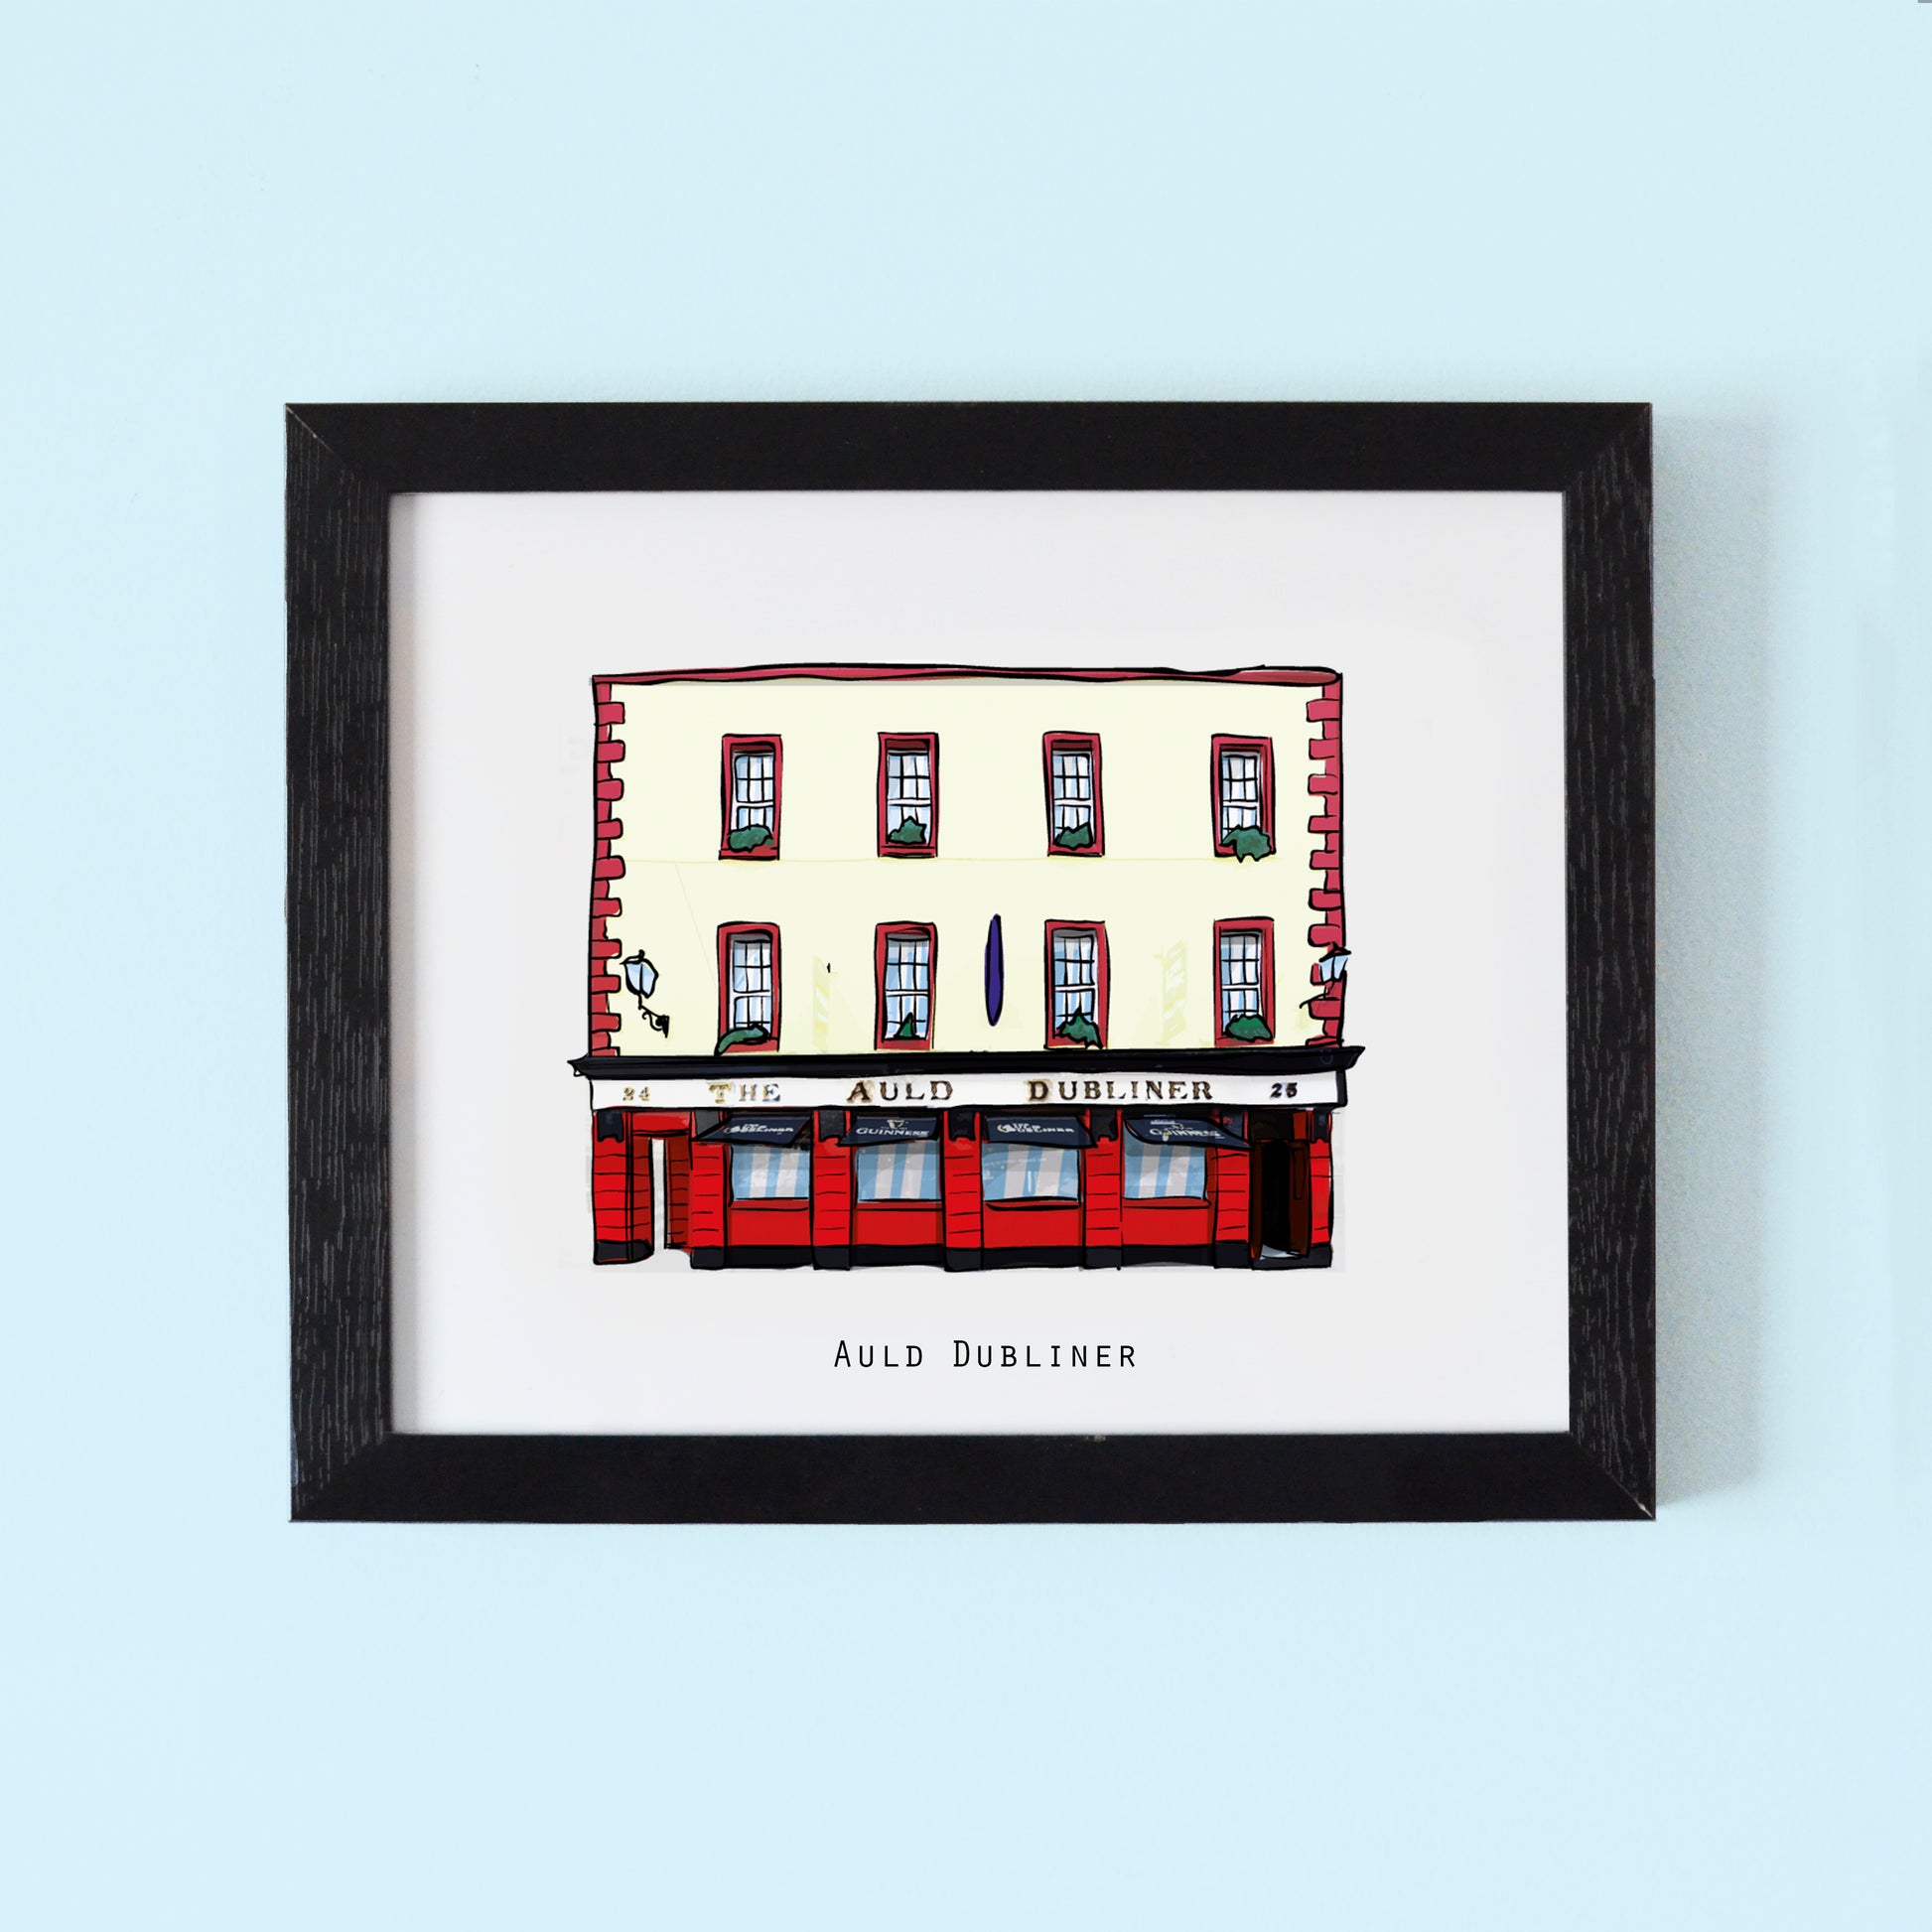 The Auld Dubliner Illustrated pubs of Dublin